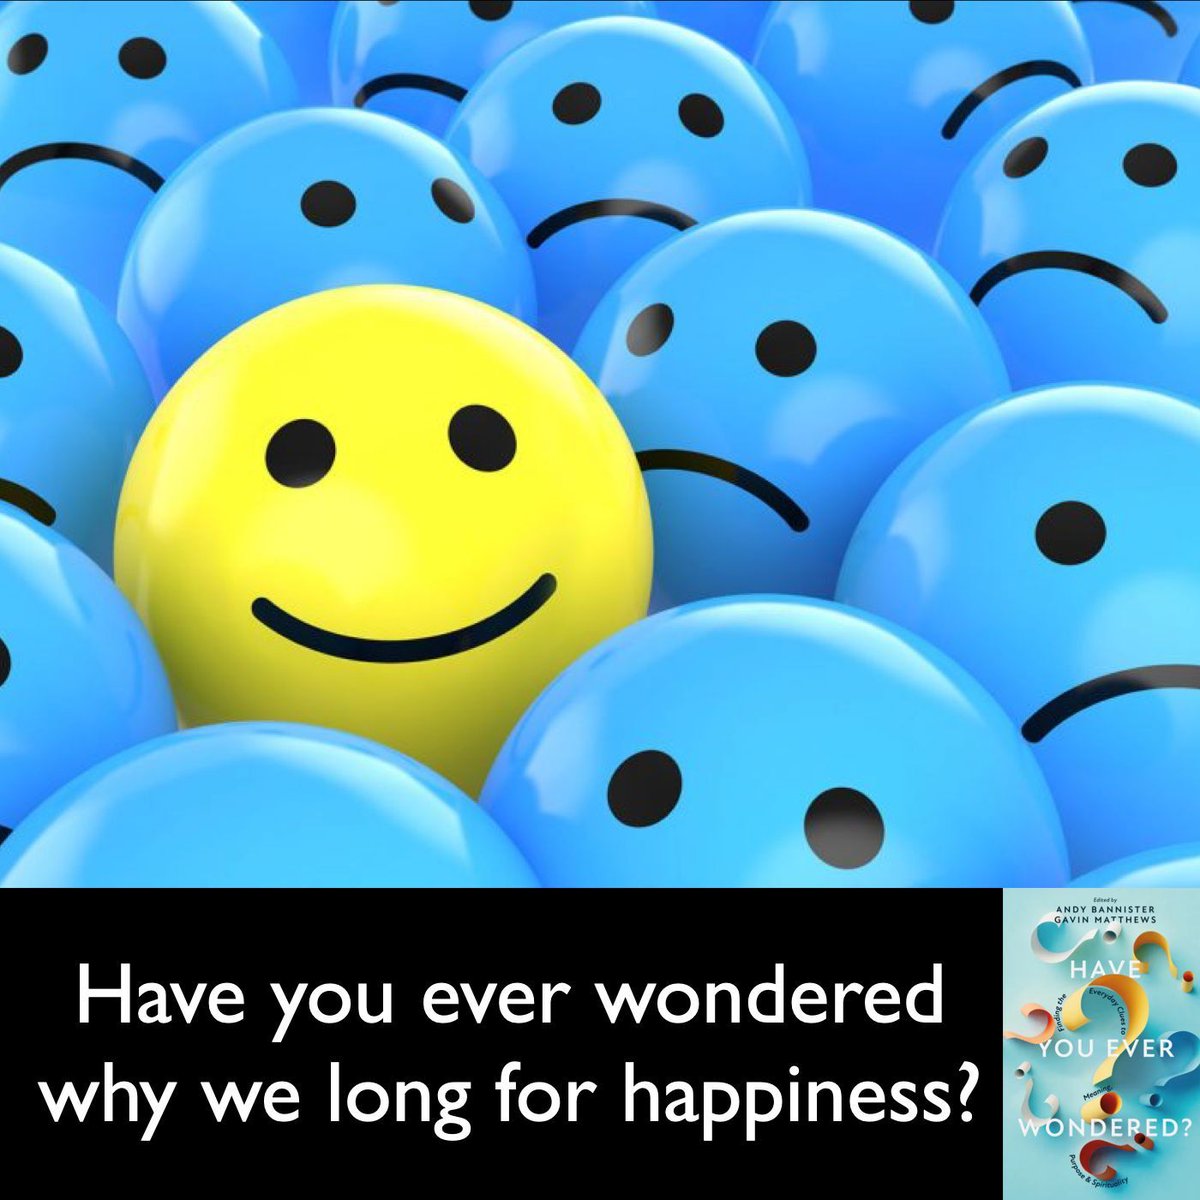 Have you ever wondered why we long for happiness (and why we often seem to chase it in all the wrong places)? That's one of many questions we explore in the best-selling new book, 'Have You Ever Wondered?'. Find it at buff.ly/3UJqXJA.